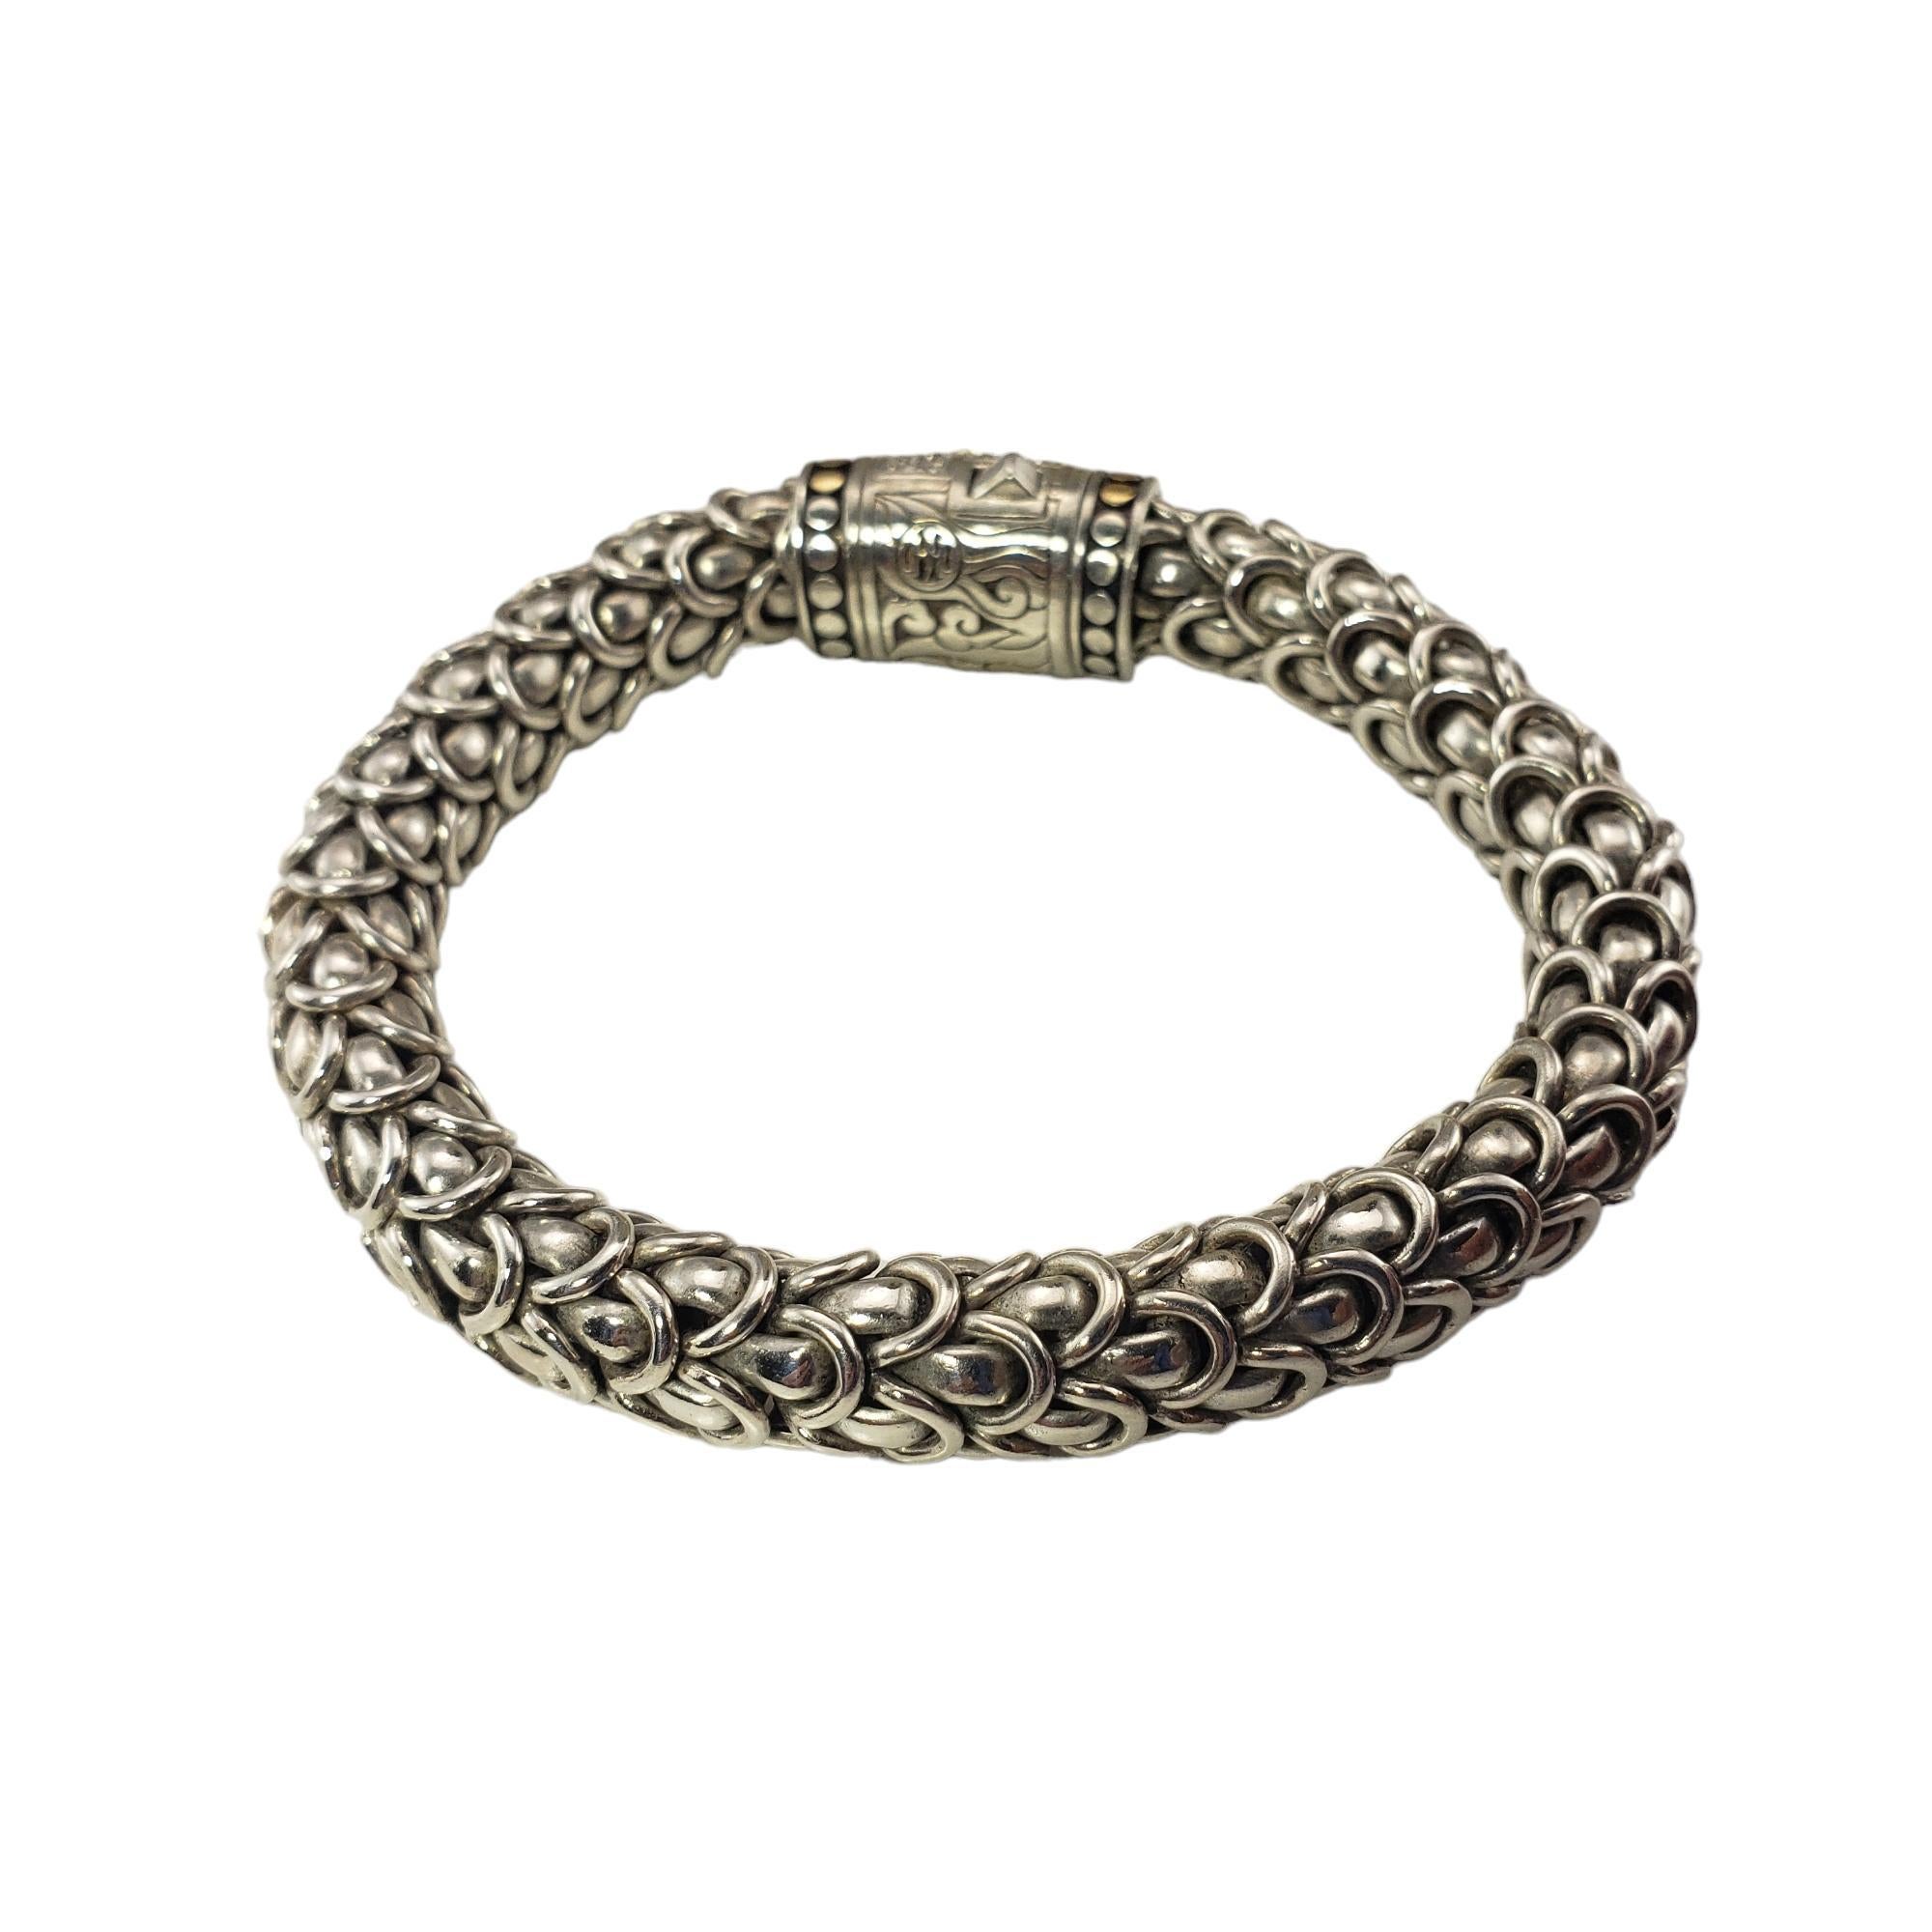 John Hardy Legends Naga Sterling Silver/18K Yellow Gold and Diamond Bracelet-

This elegant John Hardy bracelet is crafted in beautifully detailed sterling silver and 18K yellow gold and accented with sparkling pave set diamonds.  
Width: 10.5